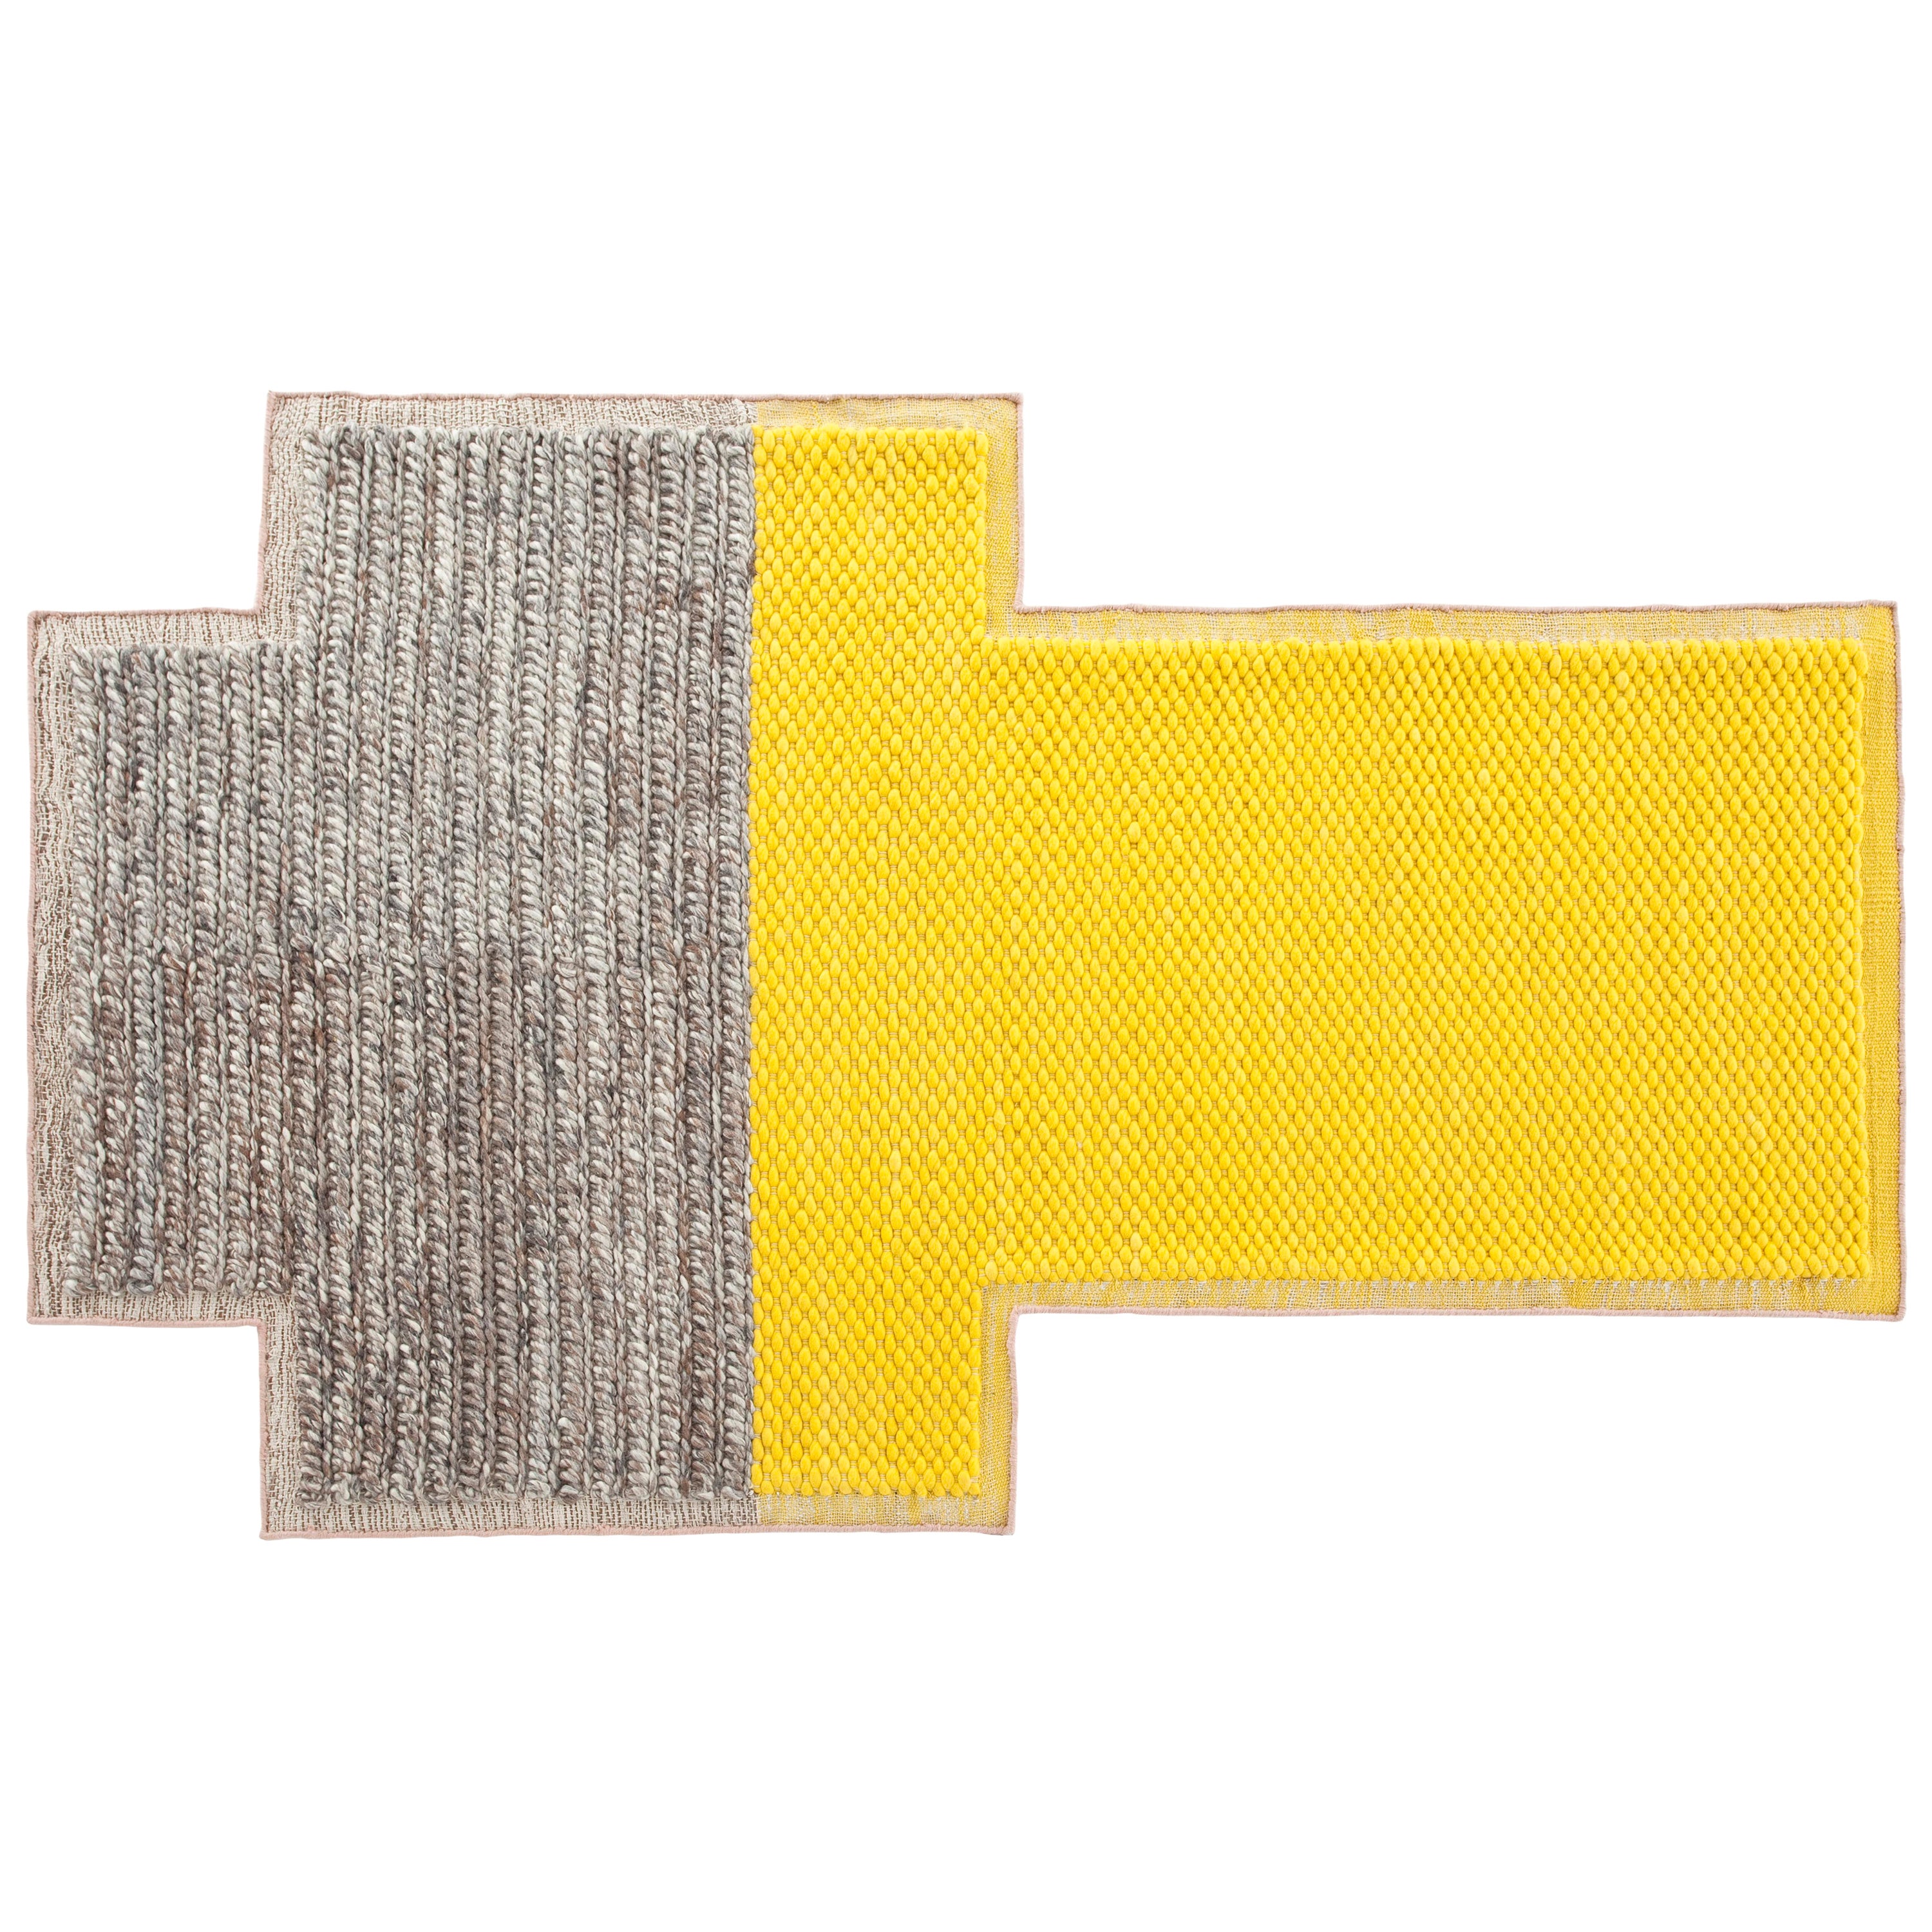 GAN Mangas Space Small Rectangular Rug Plait in Yellow by Patricia Urquiola